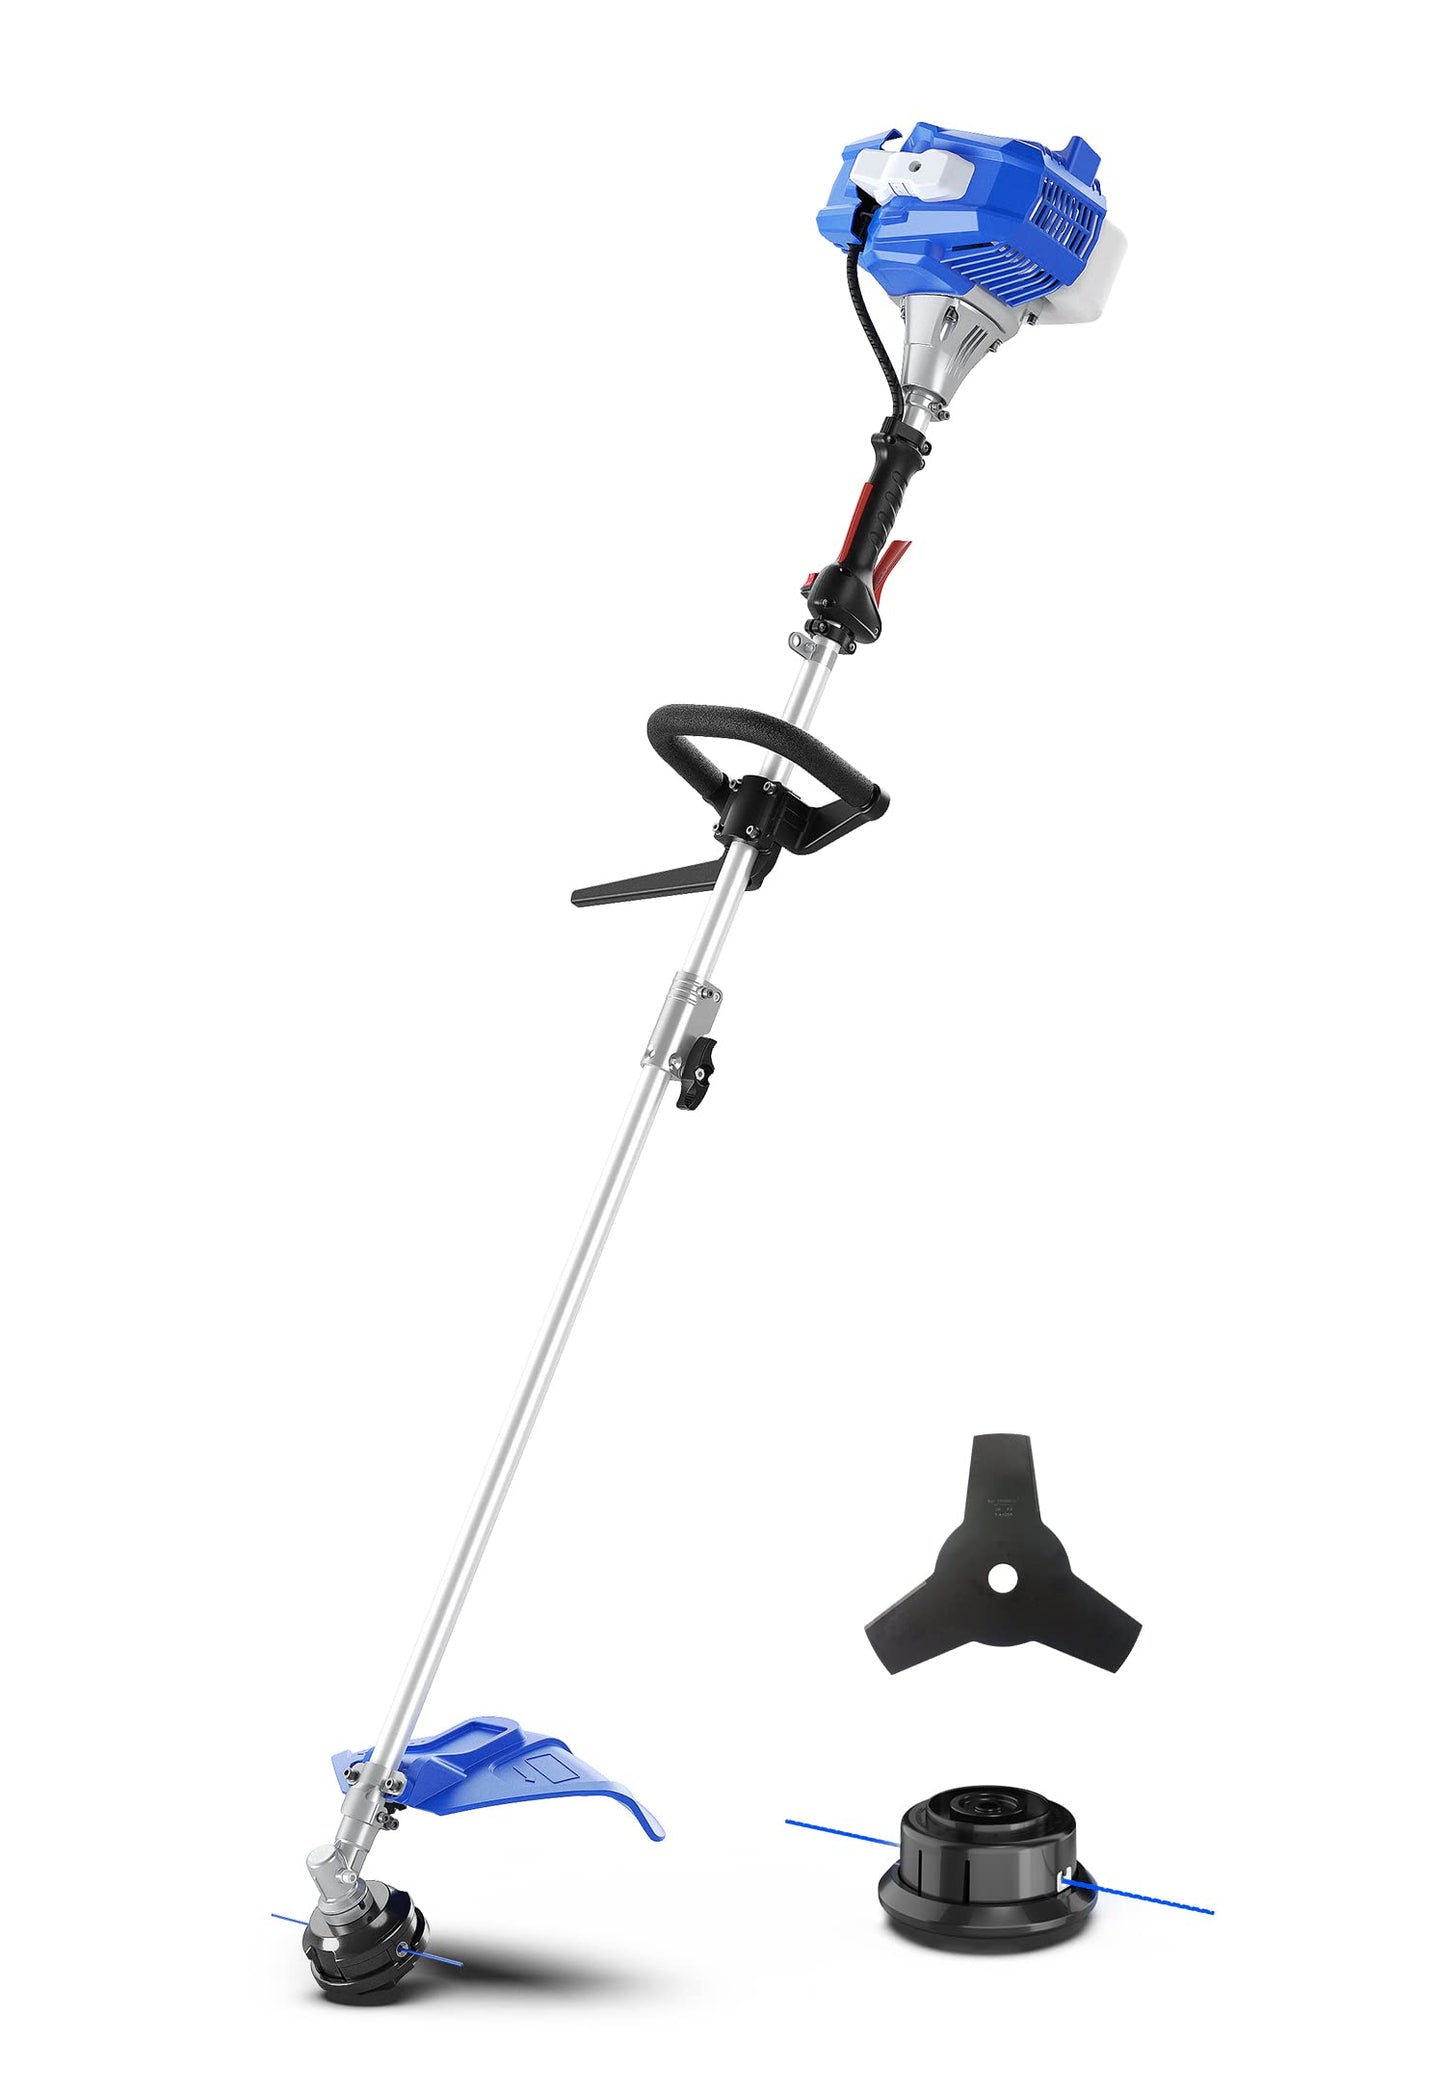 WILD BADGER POWER 26cc Weed Eater/Wacker Gas Powered, 3 in 1 String Trimmer/Edger 17'' with 10'' Brush Cutter,Rubber Handle & Shoulder Strap Included